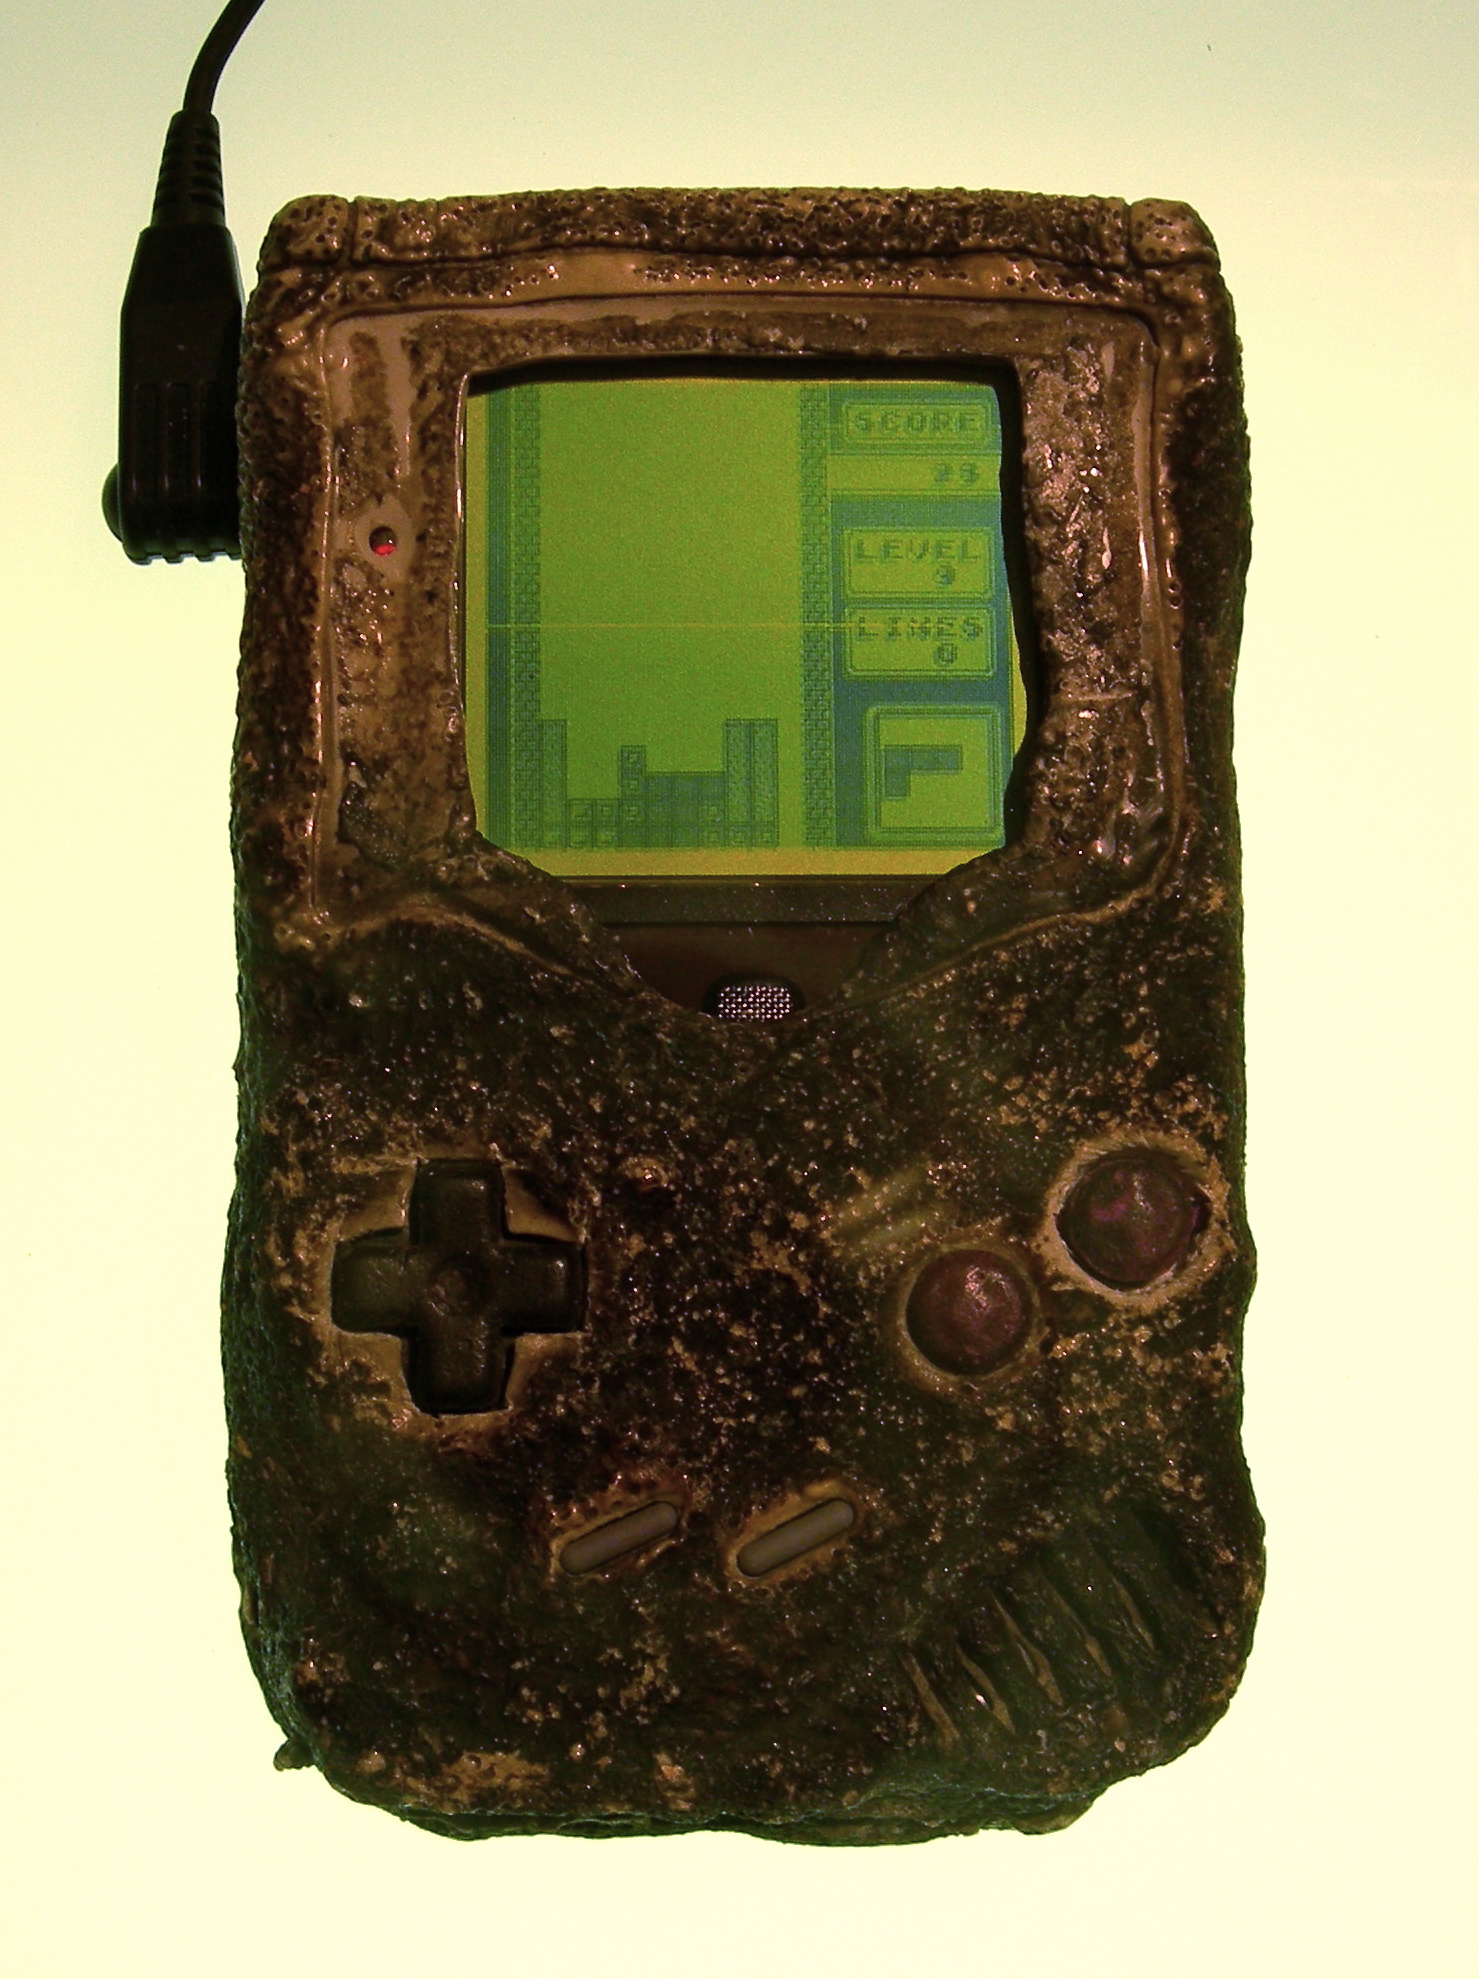 Sturdy enough to survive a bomb and 9 other facts about the Game Boy【Video】